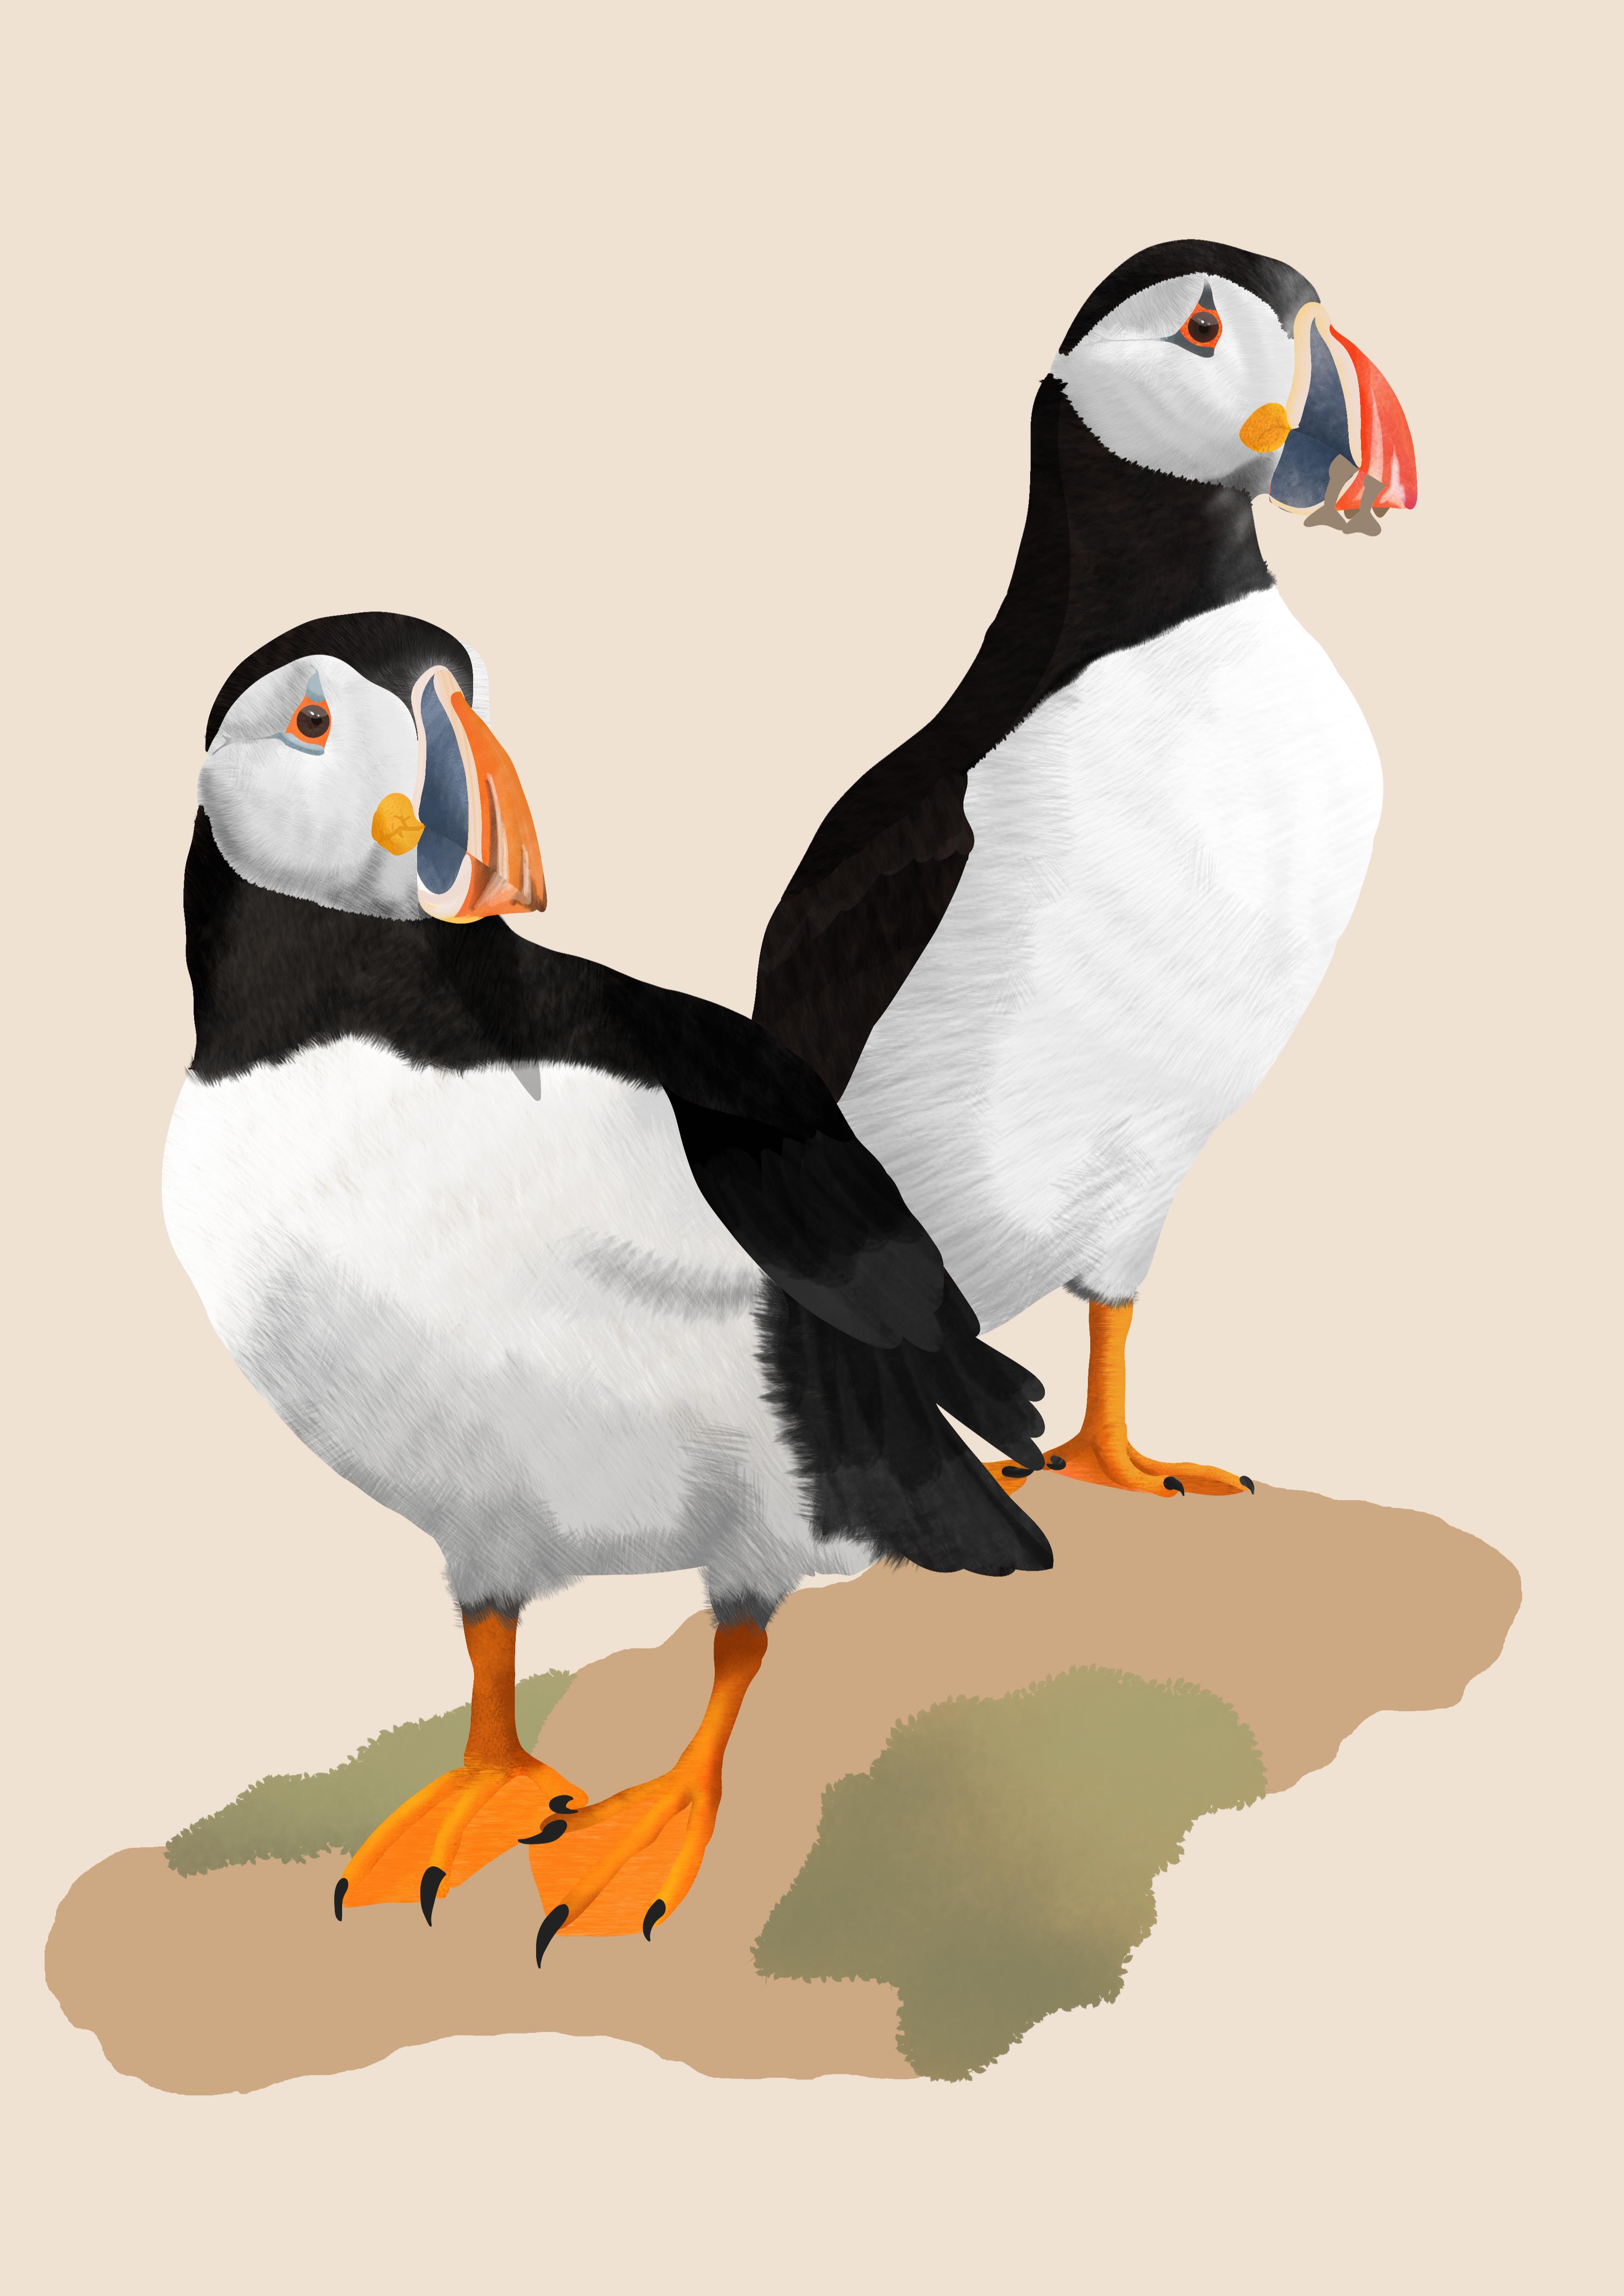 Illustration of two Atlantic puffins standing on a rock, looking off to the right